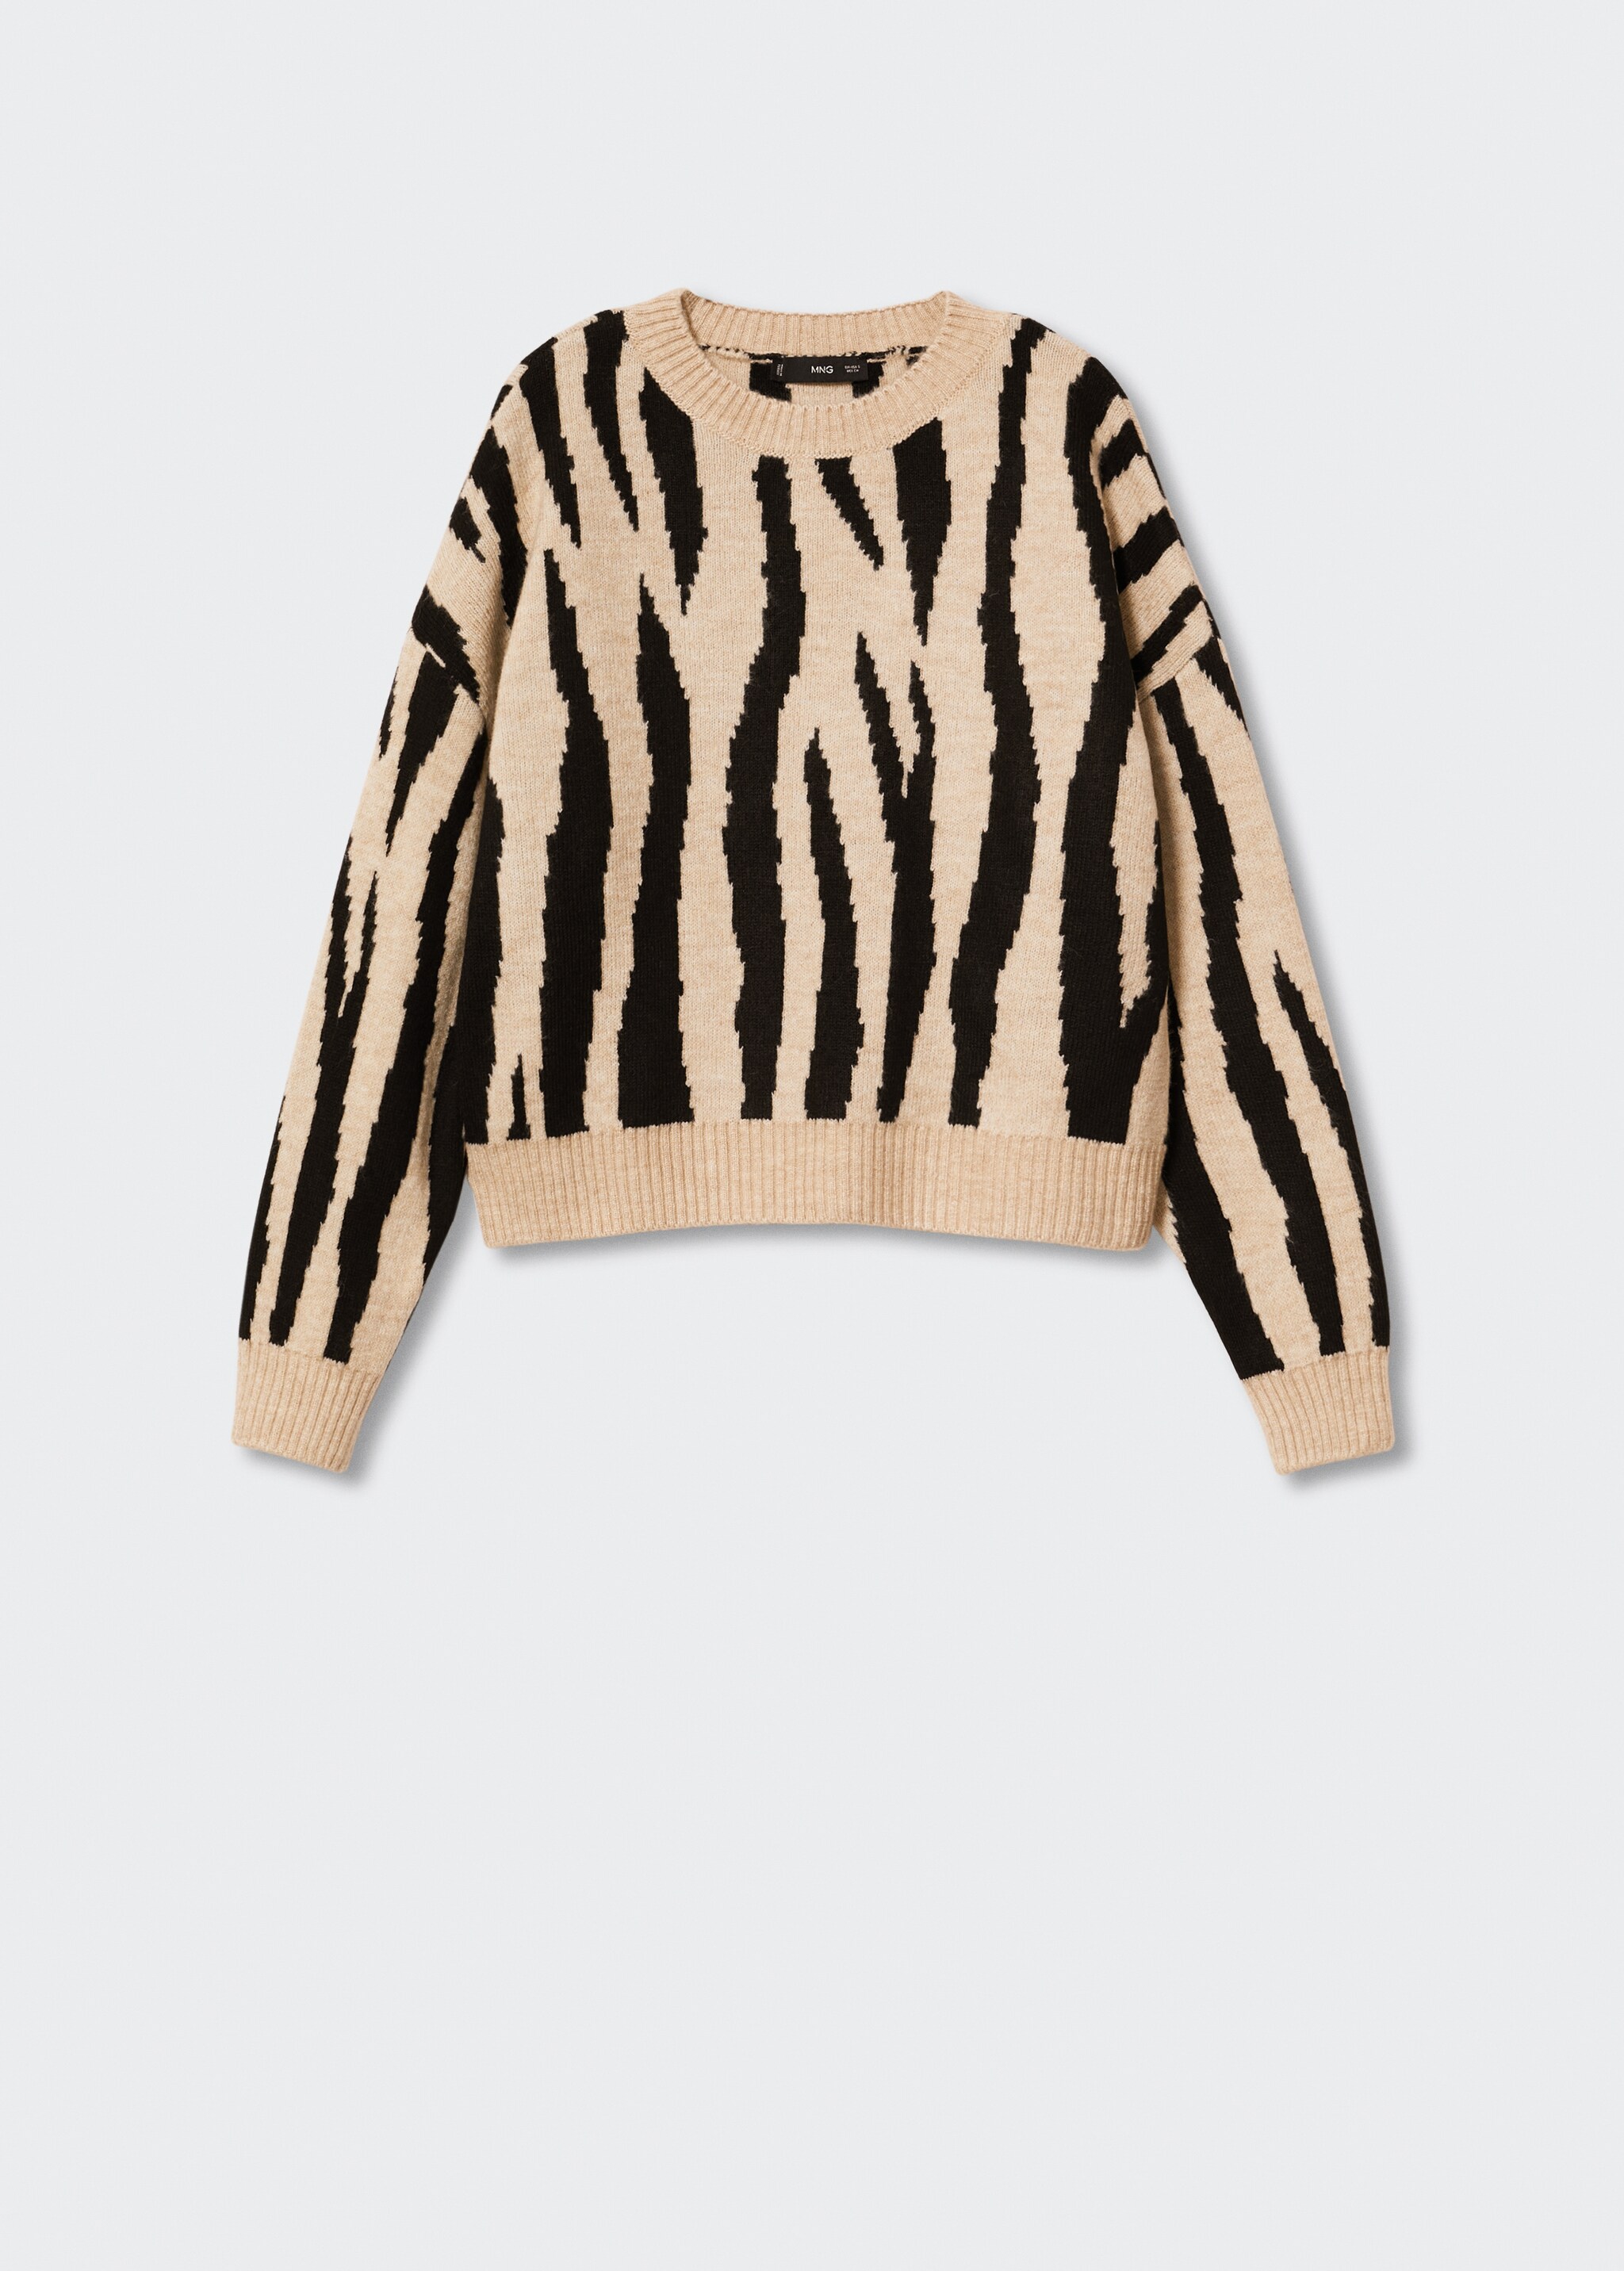 Animal print sweater - Article without model